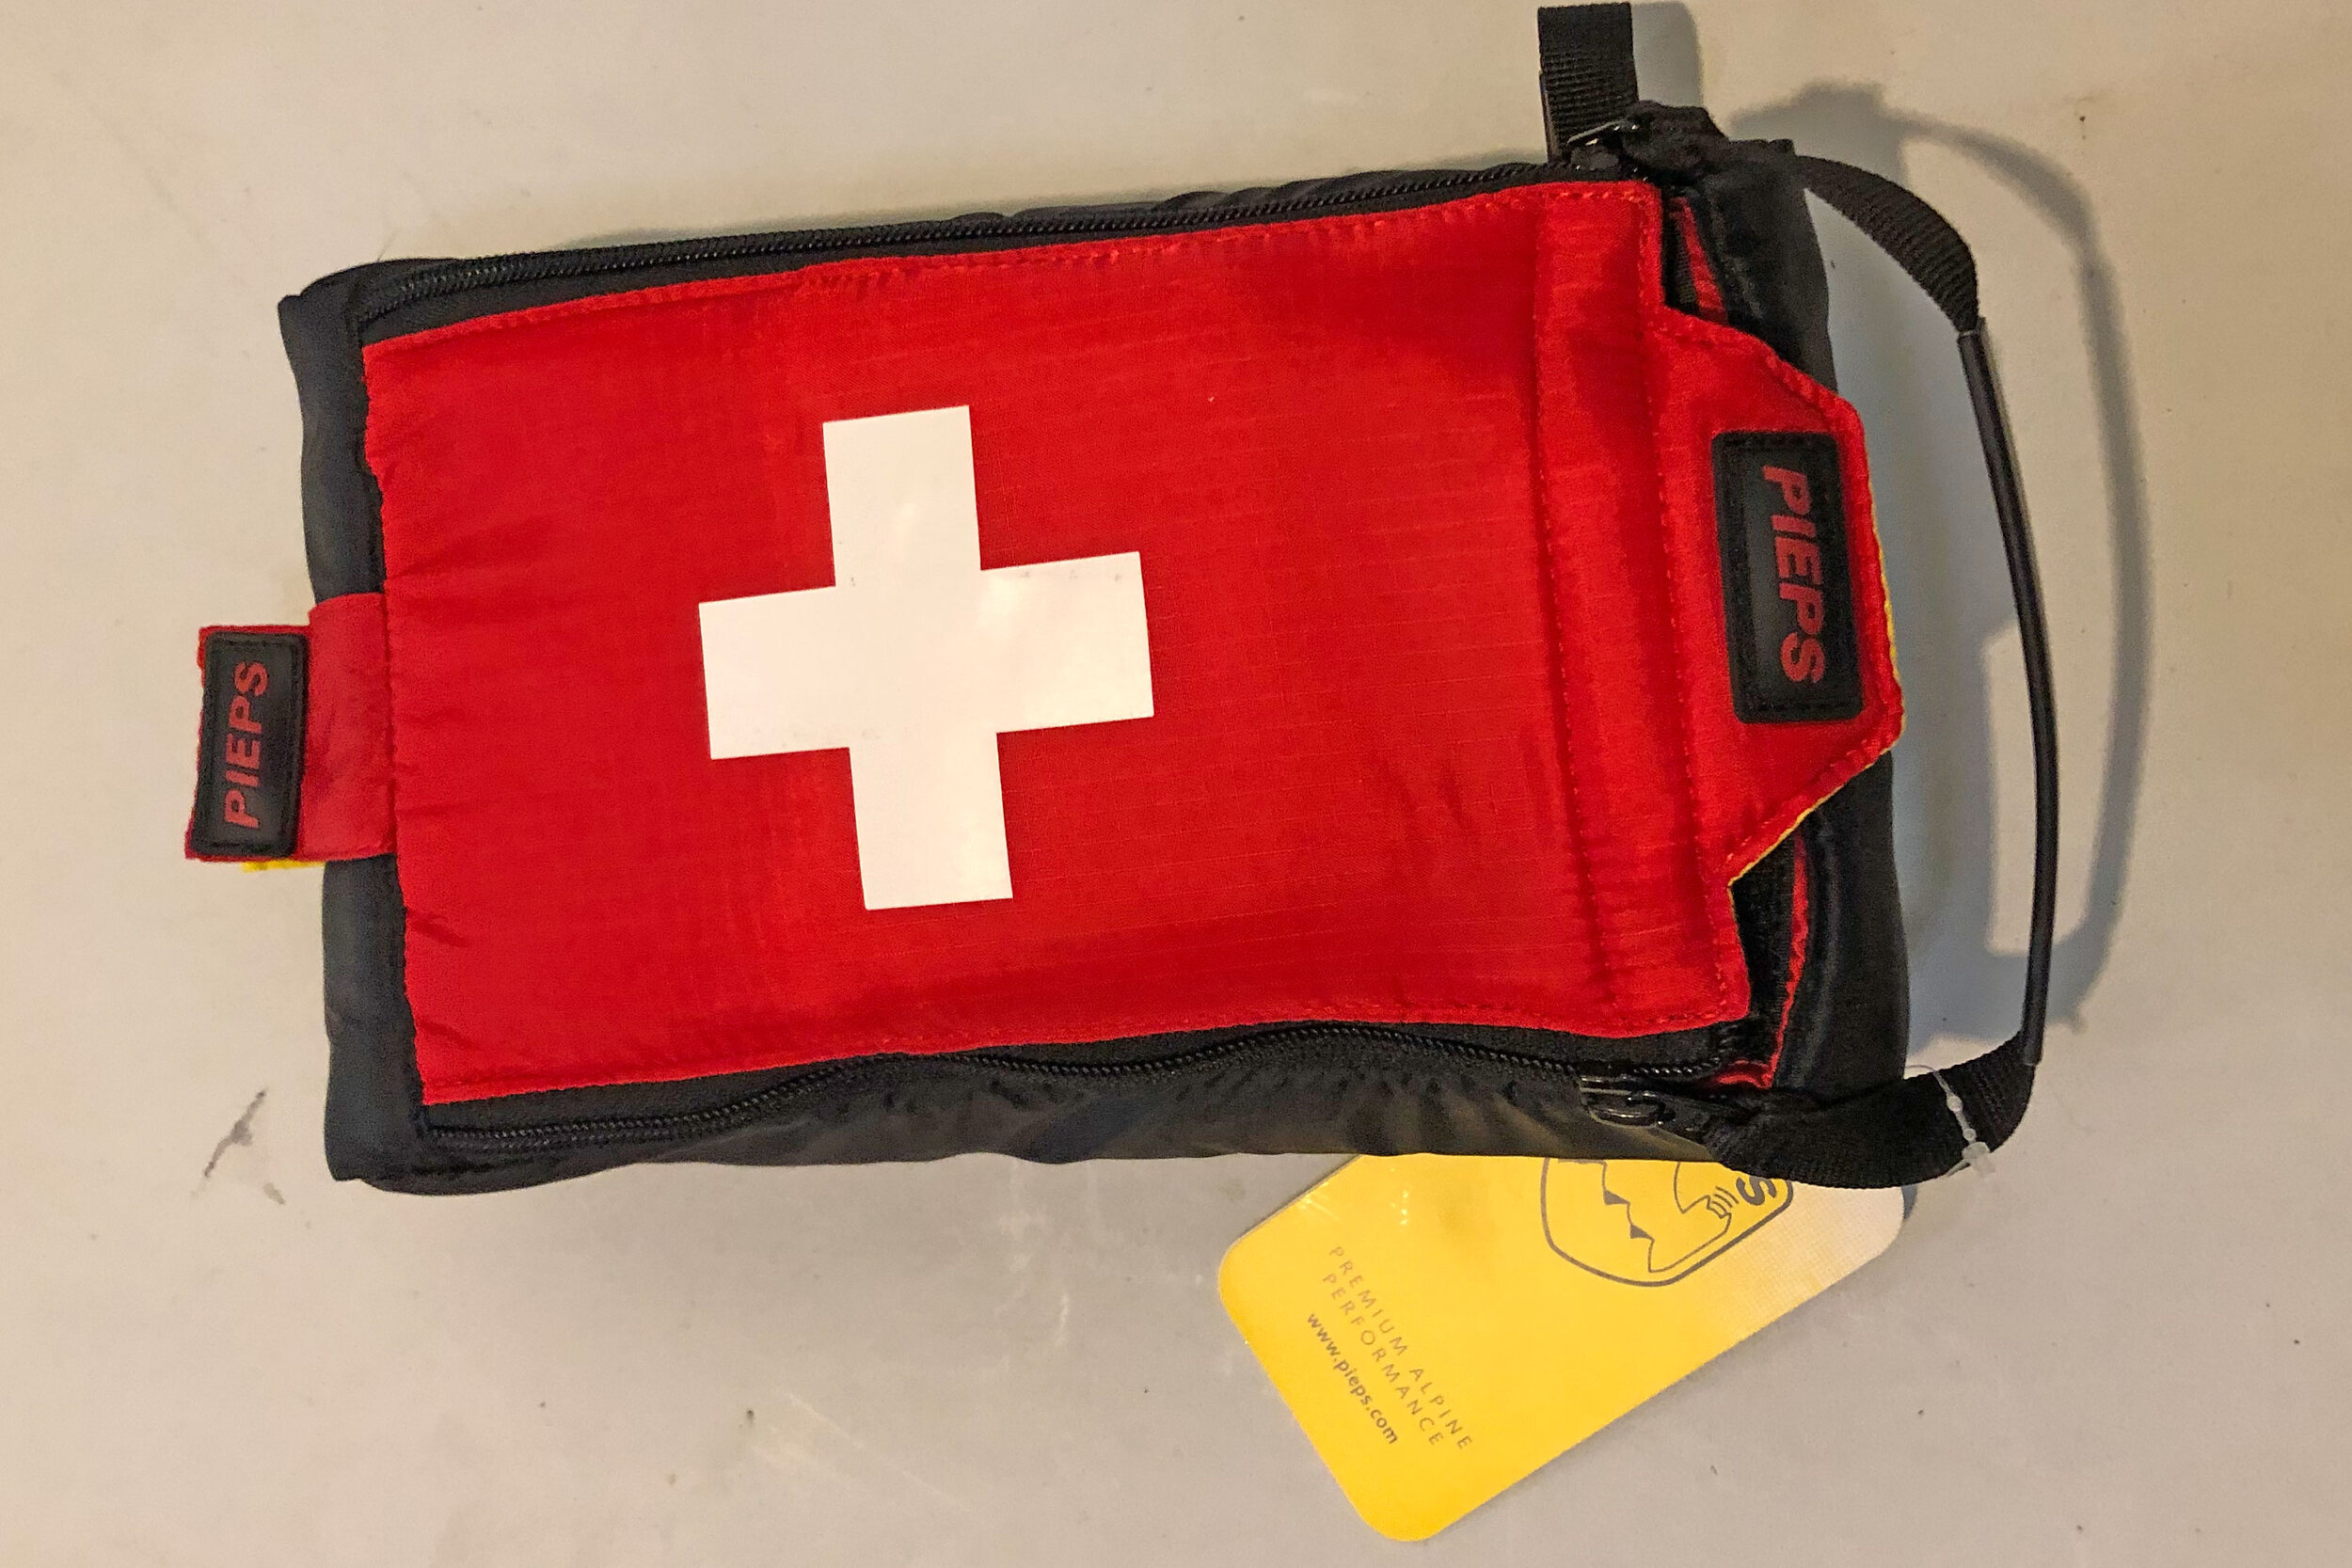  Compact First Aid Kit 